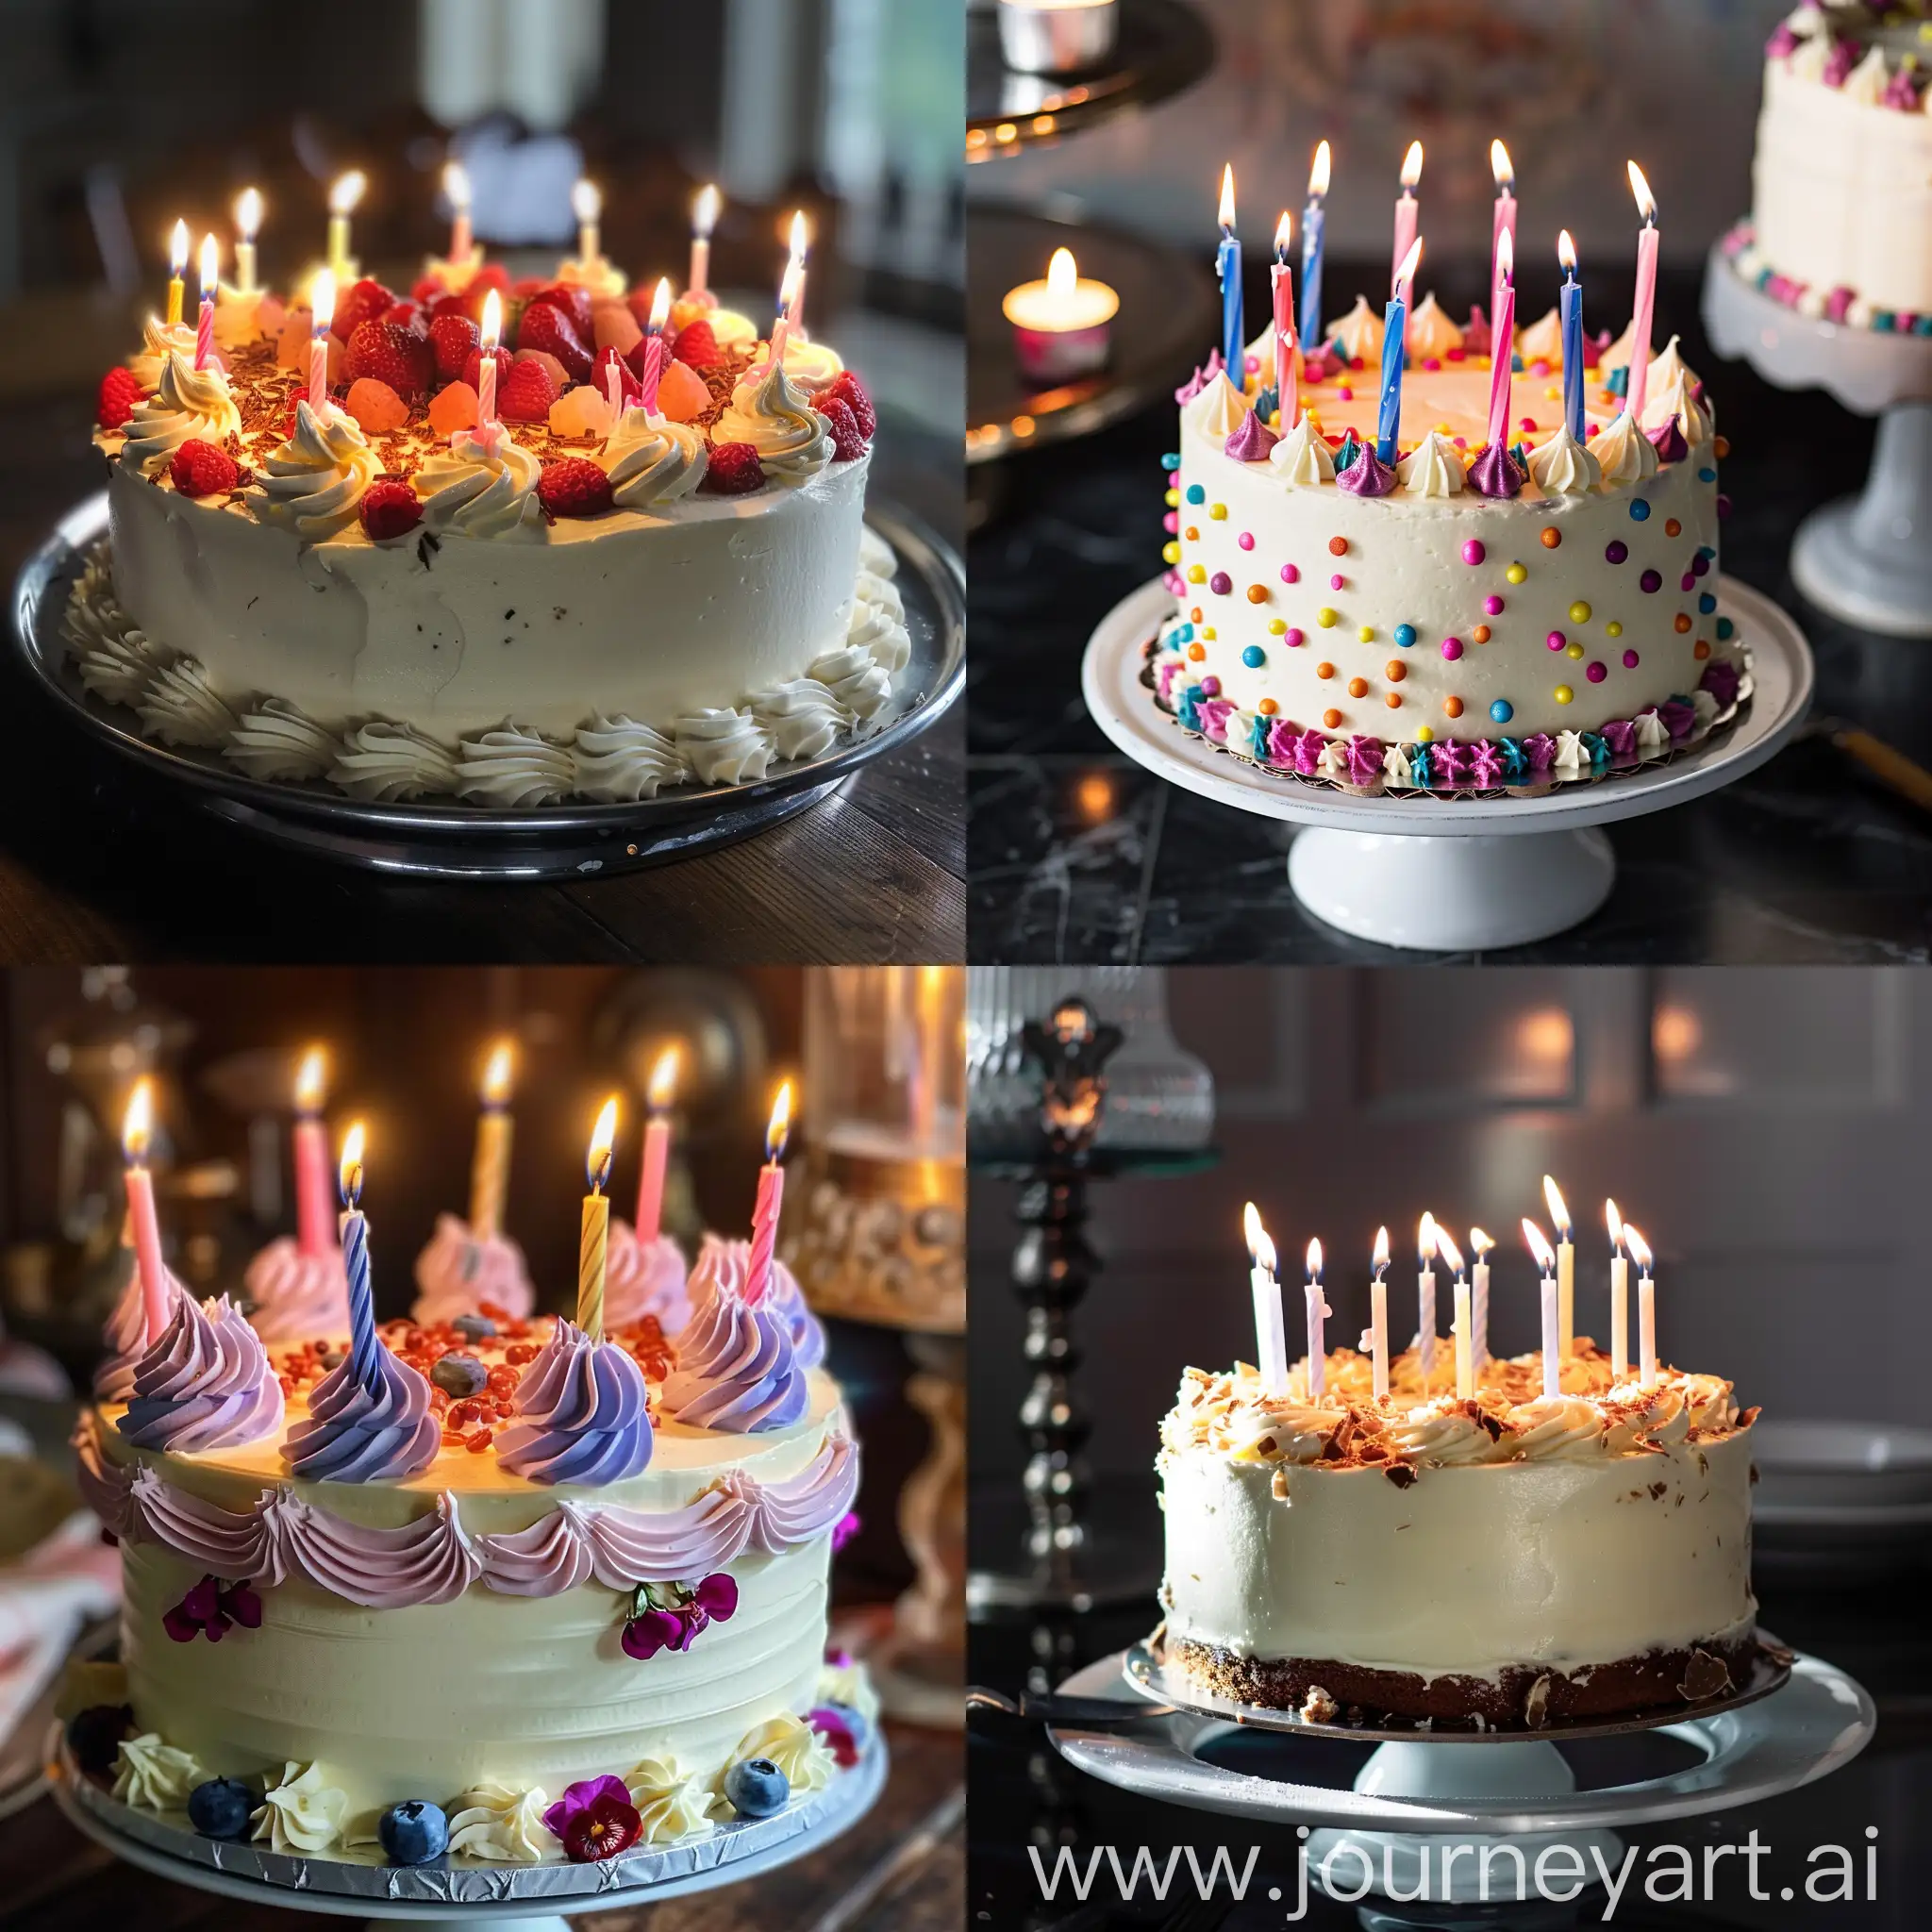 Celebratory-Cake-with-Colorful-Candles